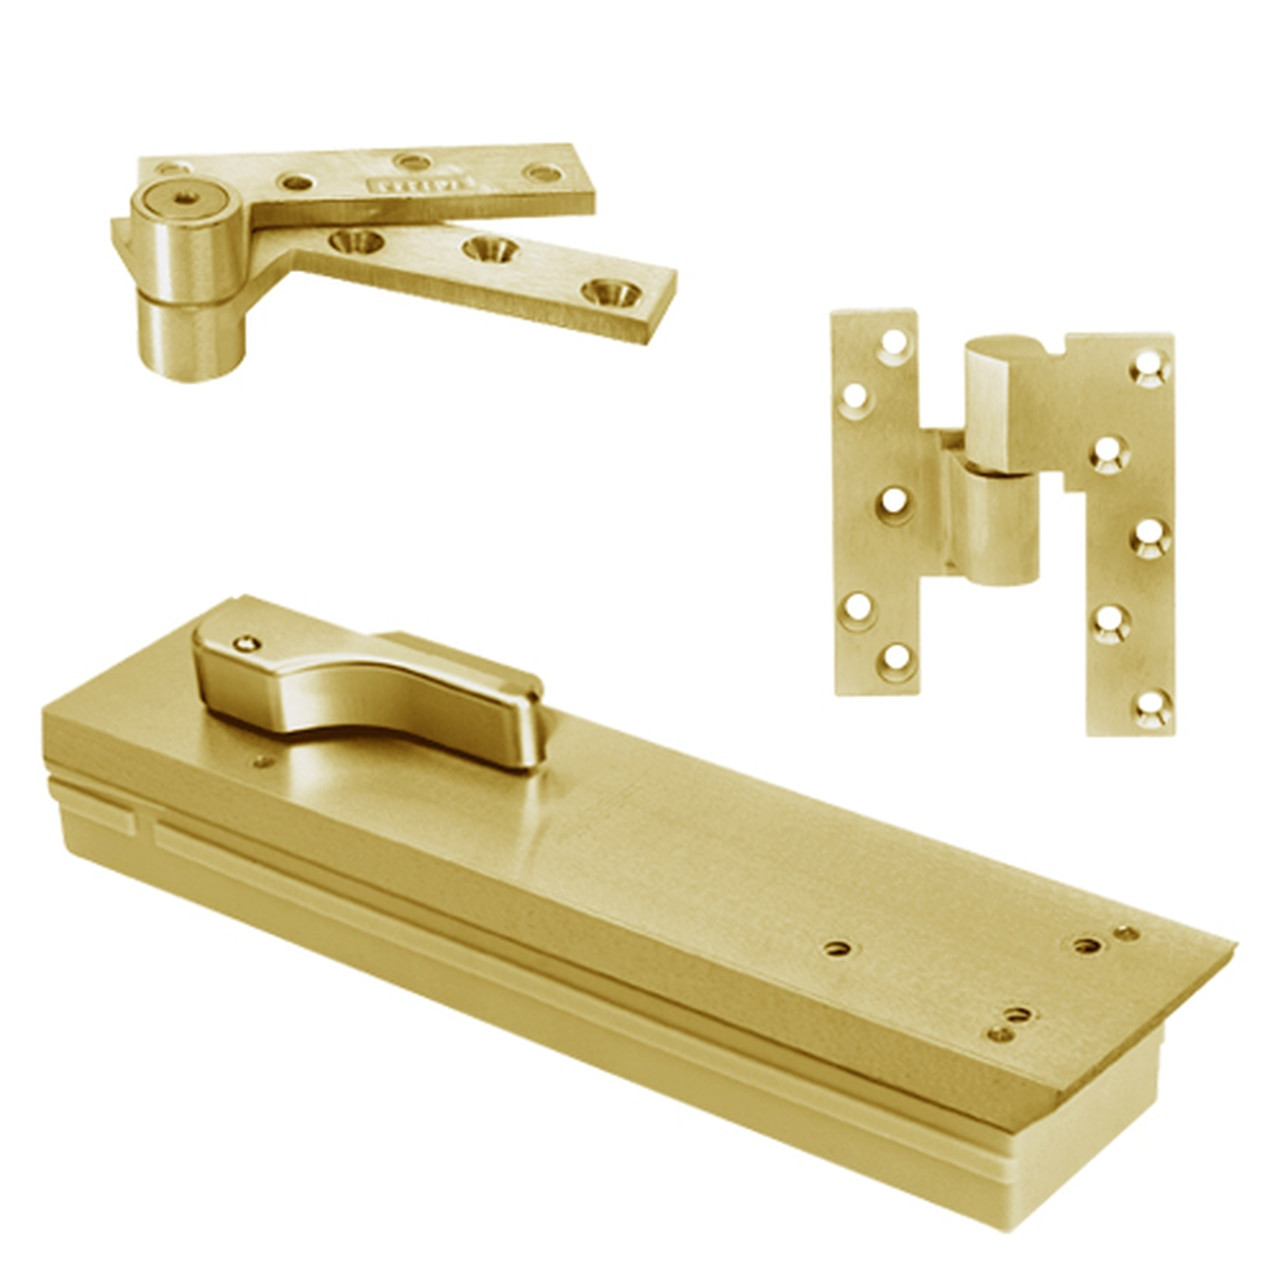 FQ5105NBC-SC-LH-606 Rixson Q51 Series Fire Rated 3/4" Offset Hung Shallow Depth Floor Closers in Satin Brass Finish